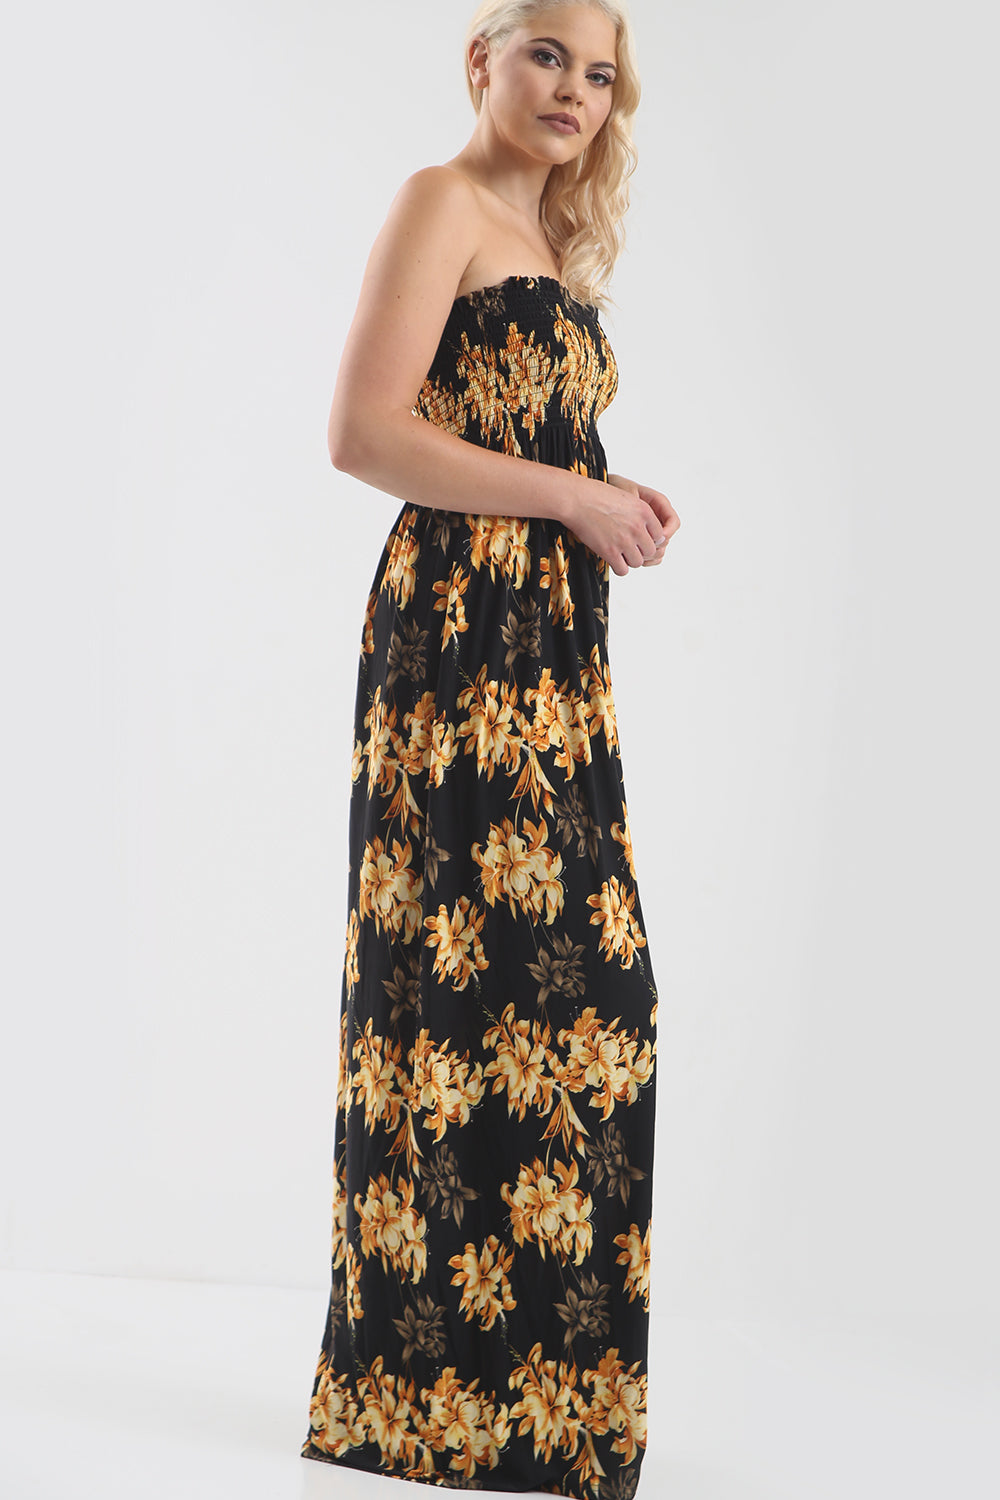 Strapless Maxi Dress in Gold Tropical Print - bejealous-com